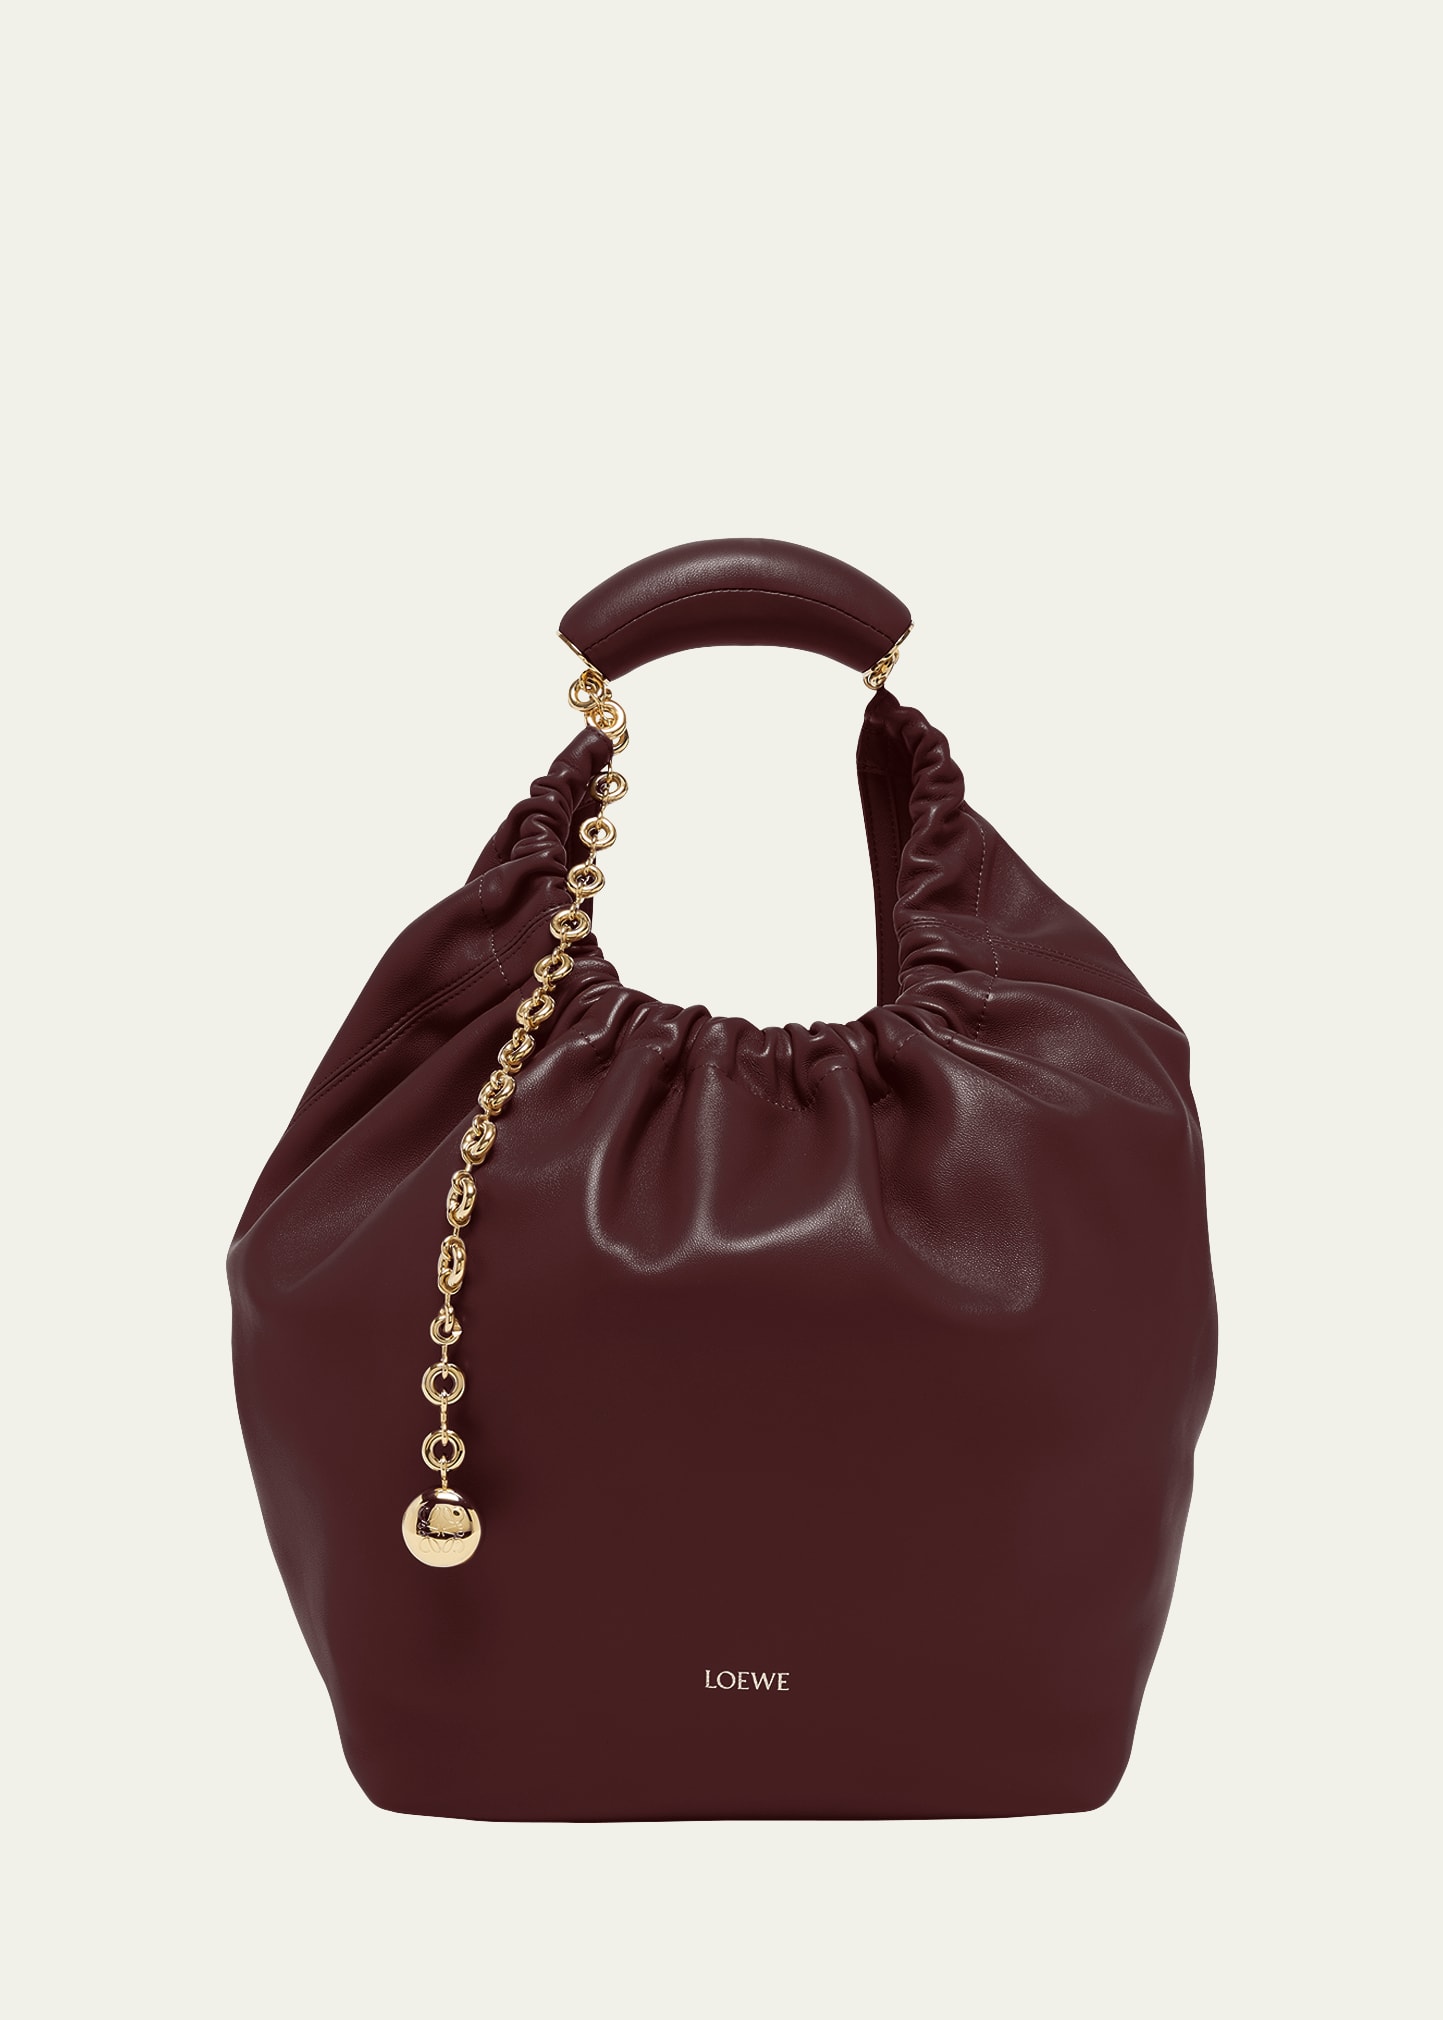 Squeeze Small Shoulder Bag in Napa Leather